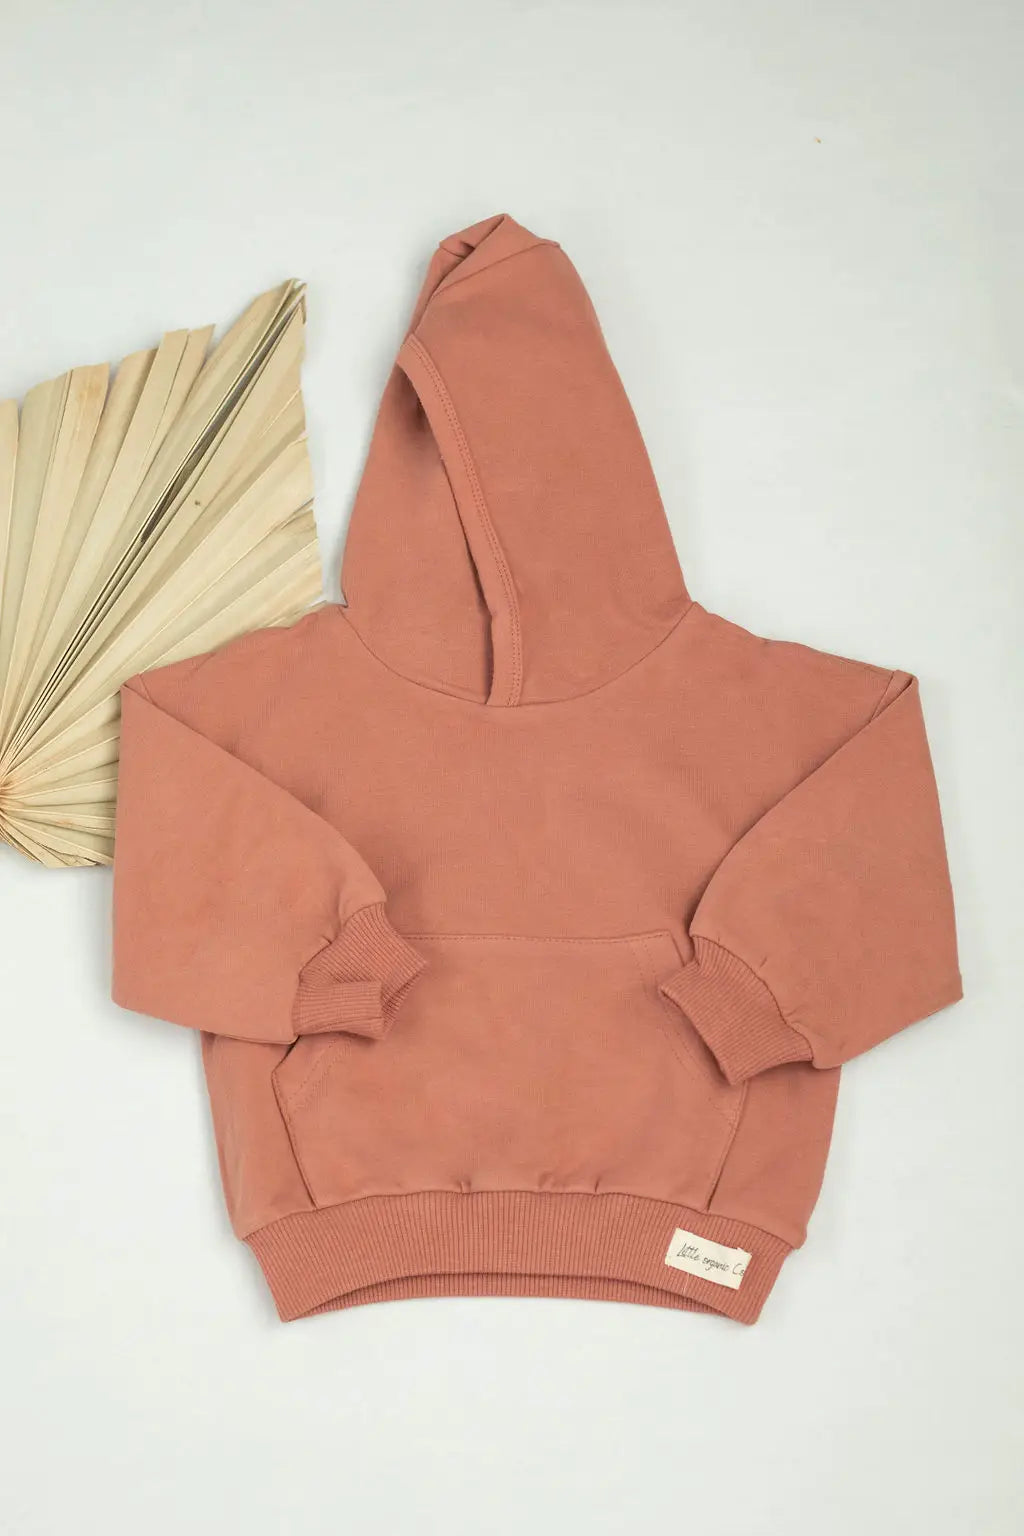 Hoodies for babies and toddlers organic french terry -Clay